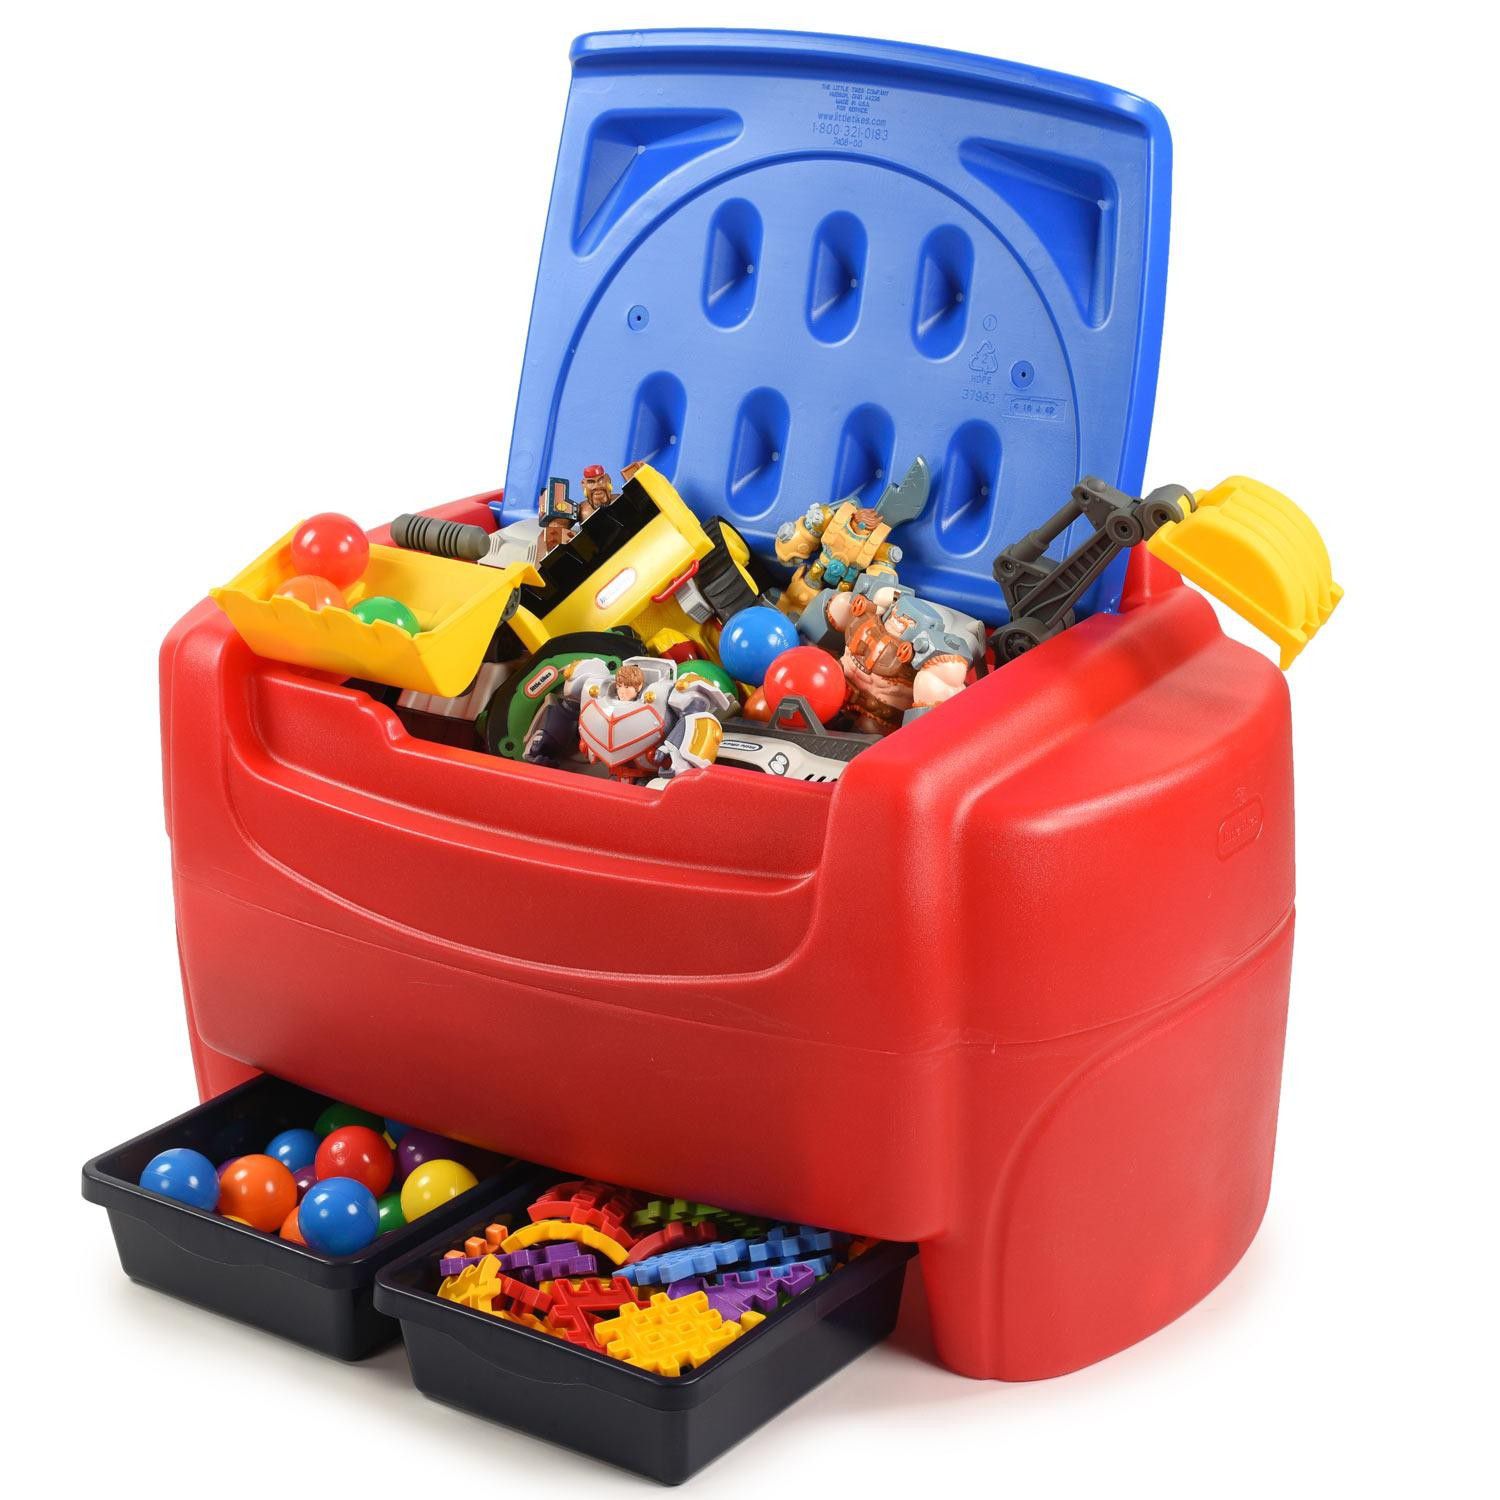 Little Tikes toy chest